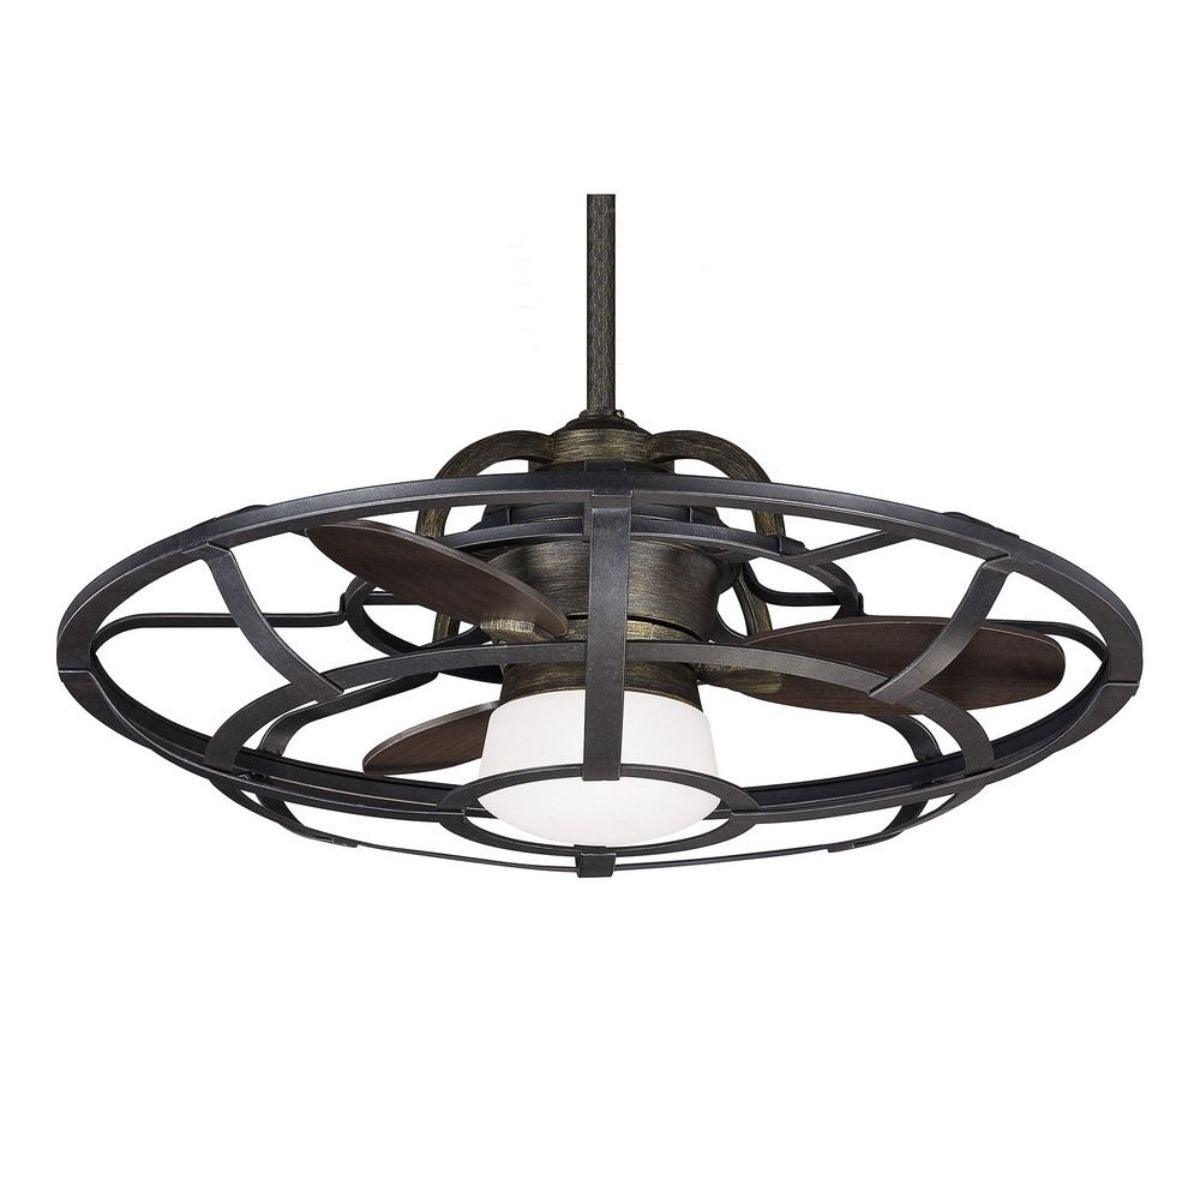 Alsace 30 Inch Outdoor Chandelier Ceiling Fan With Light And Remote, Reclaimed Wood Finish